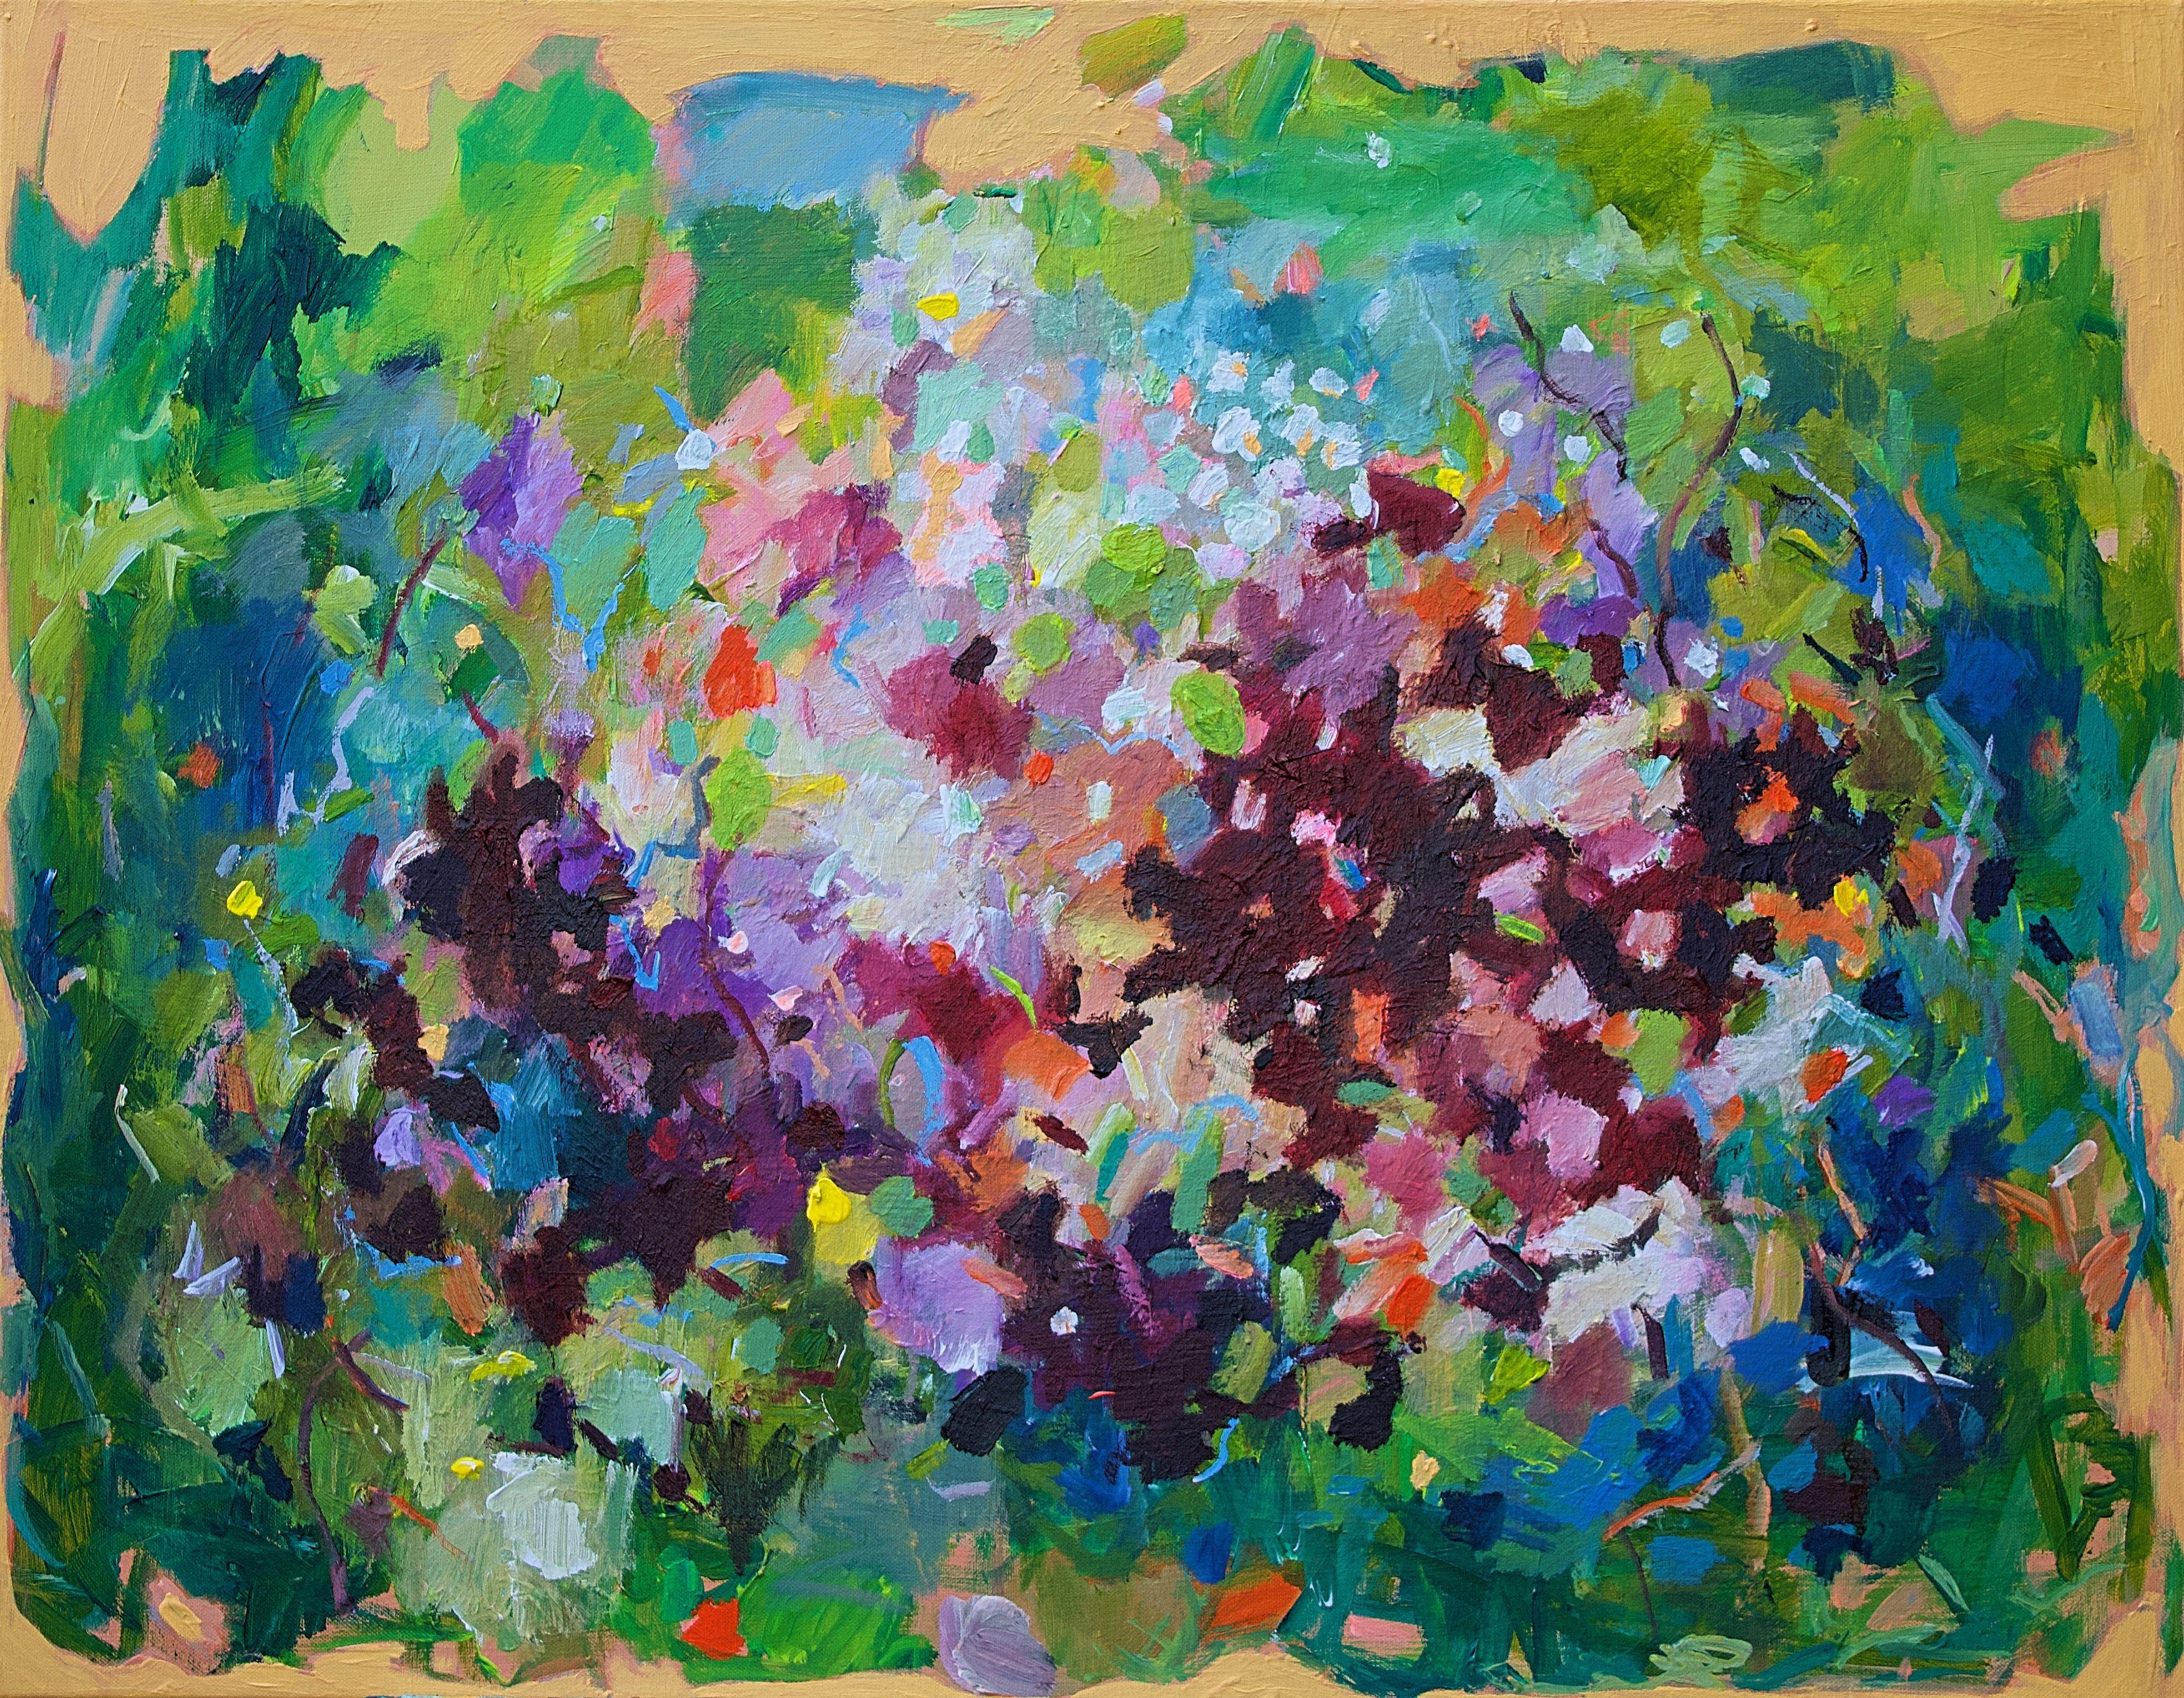 This is a happy colorful painting of abstract florals. It has deep colors like purple and red and also bright colors and even a touch of neon. The glooming light of a sunset inspired the artist in combination with the love of flowers and gardens.